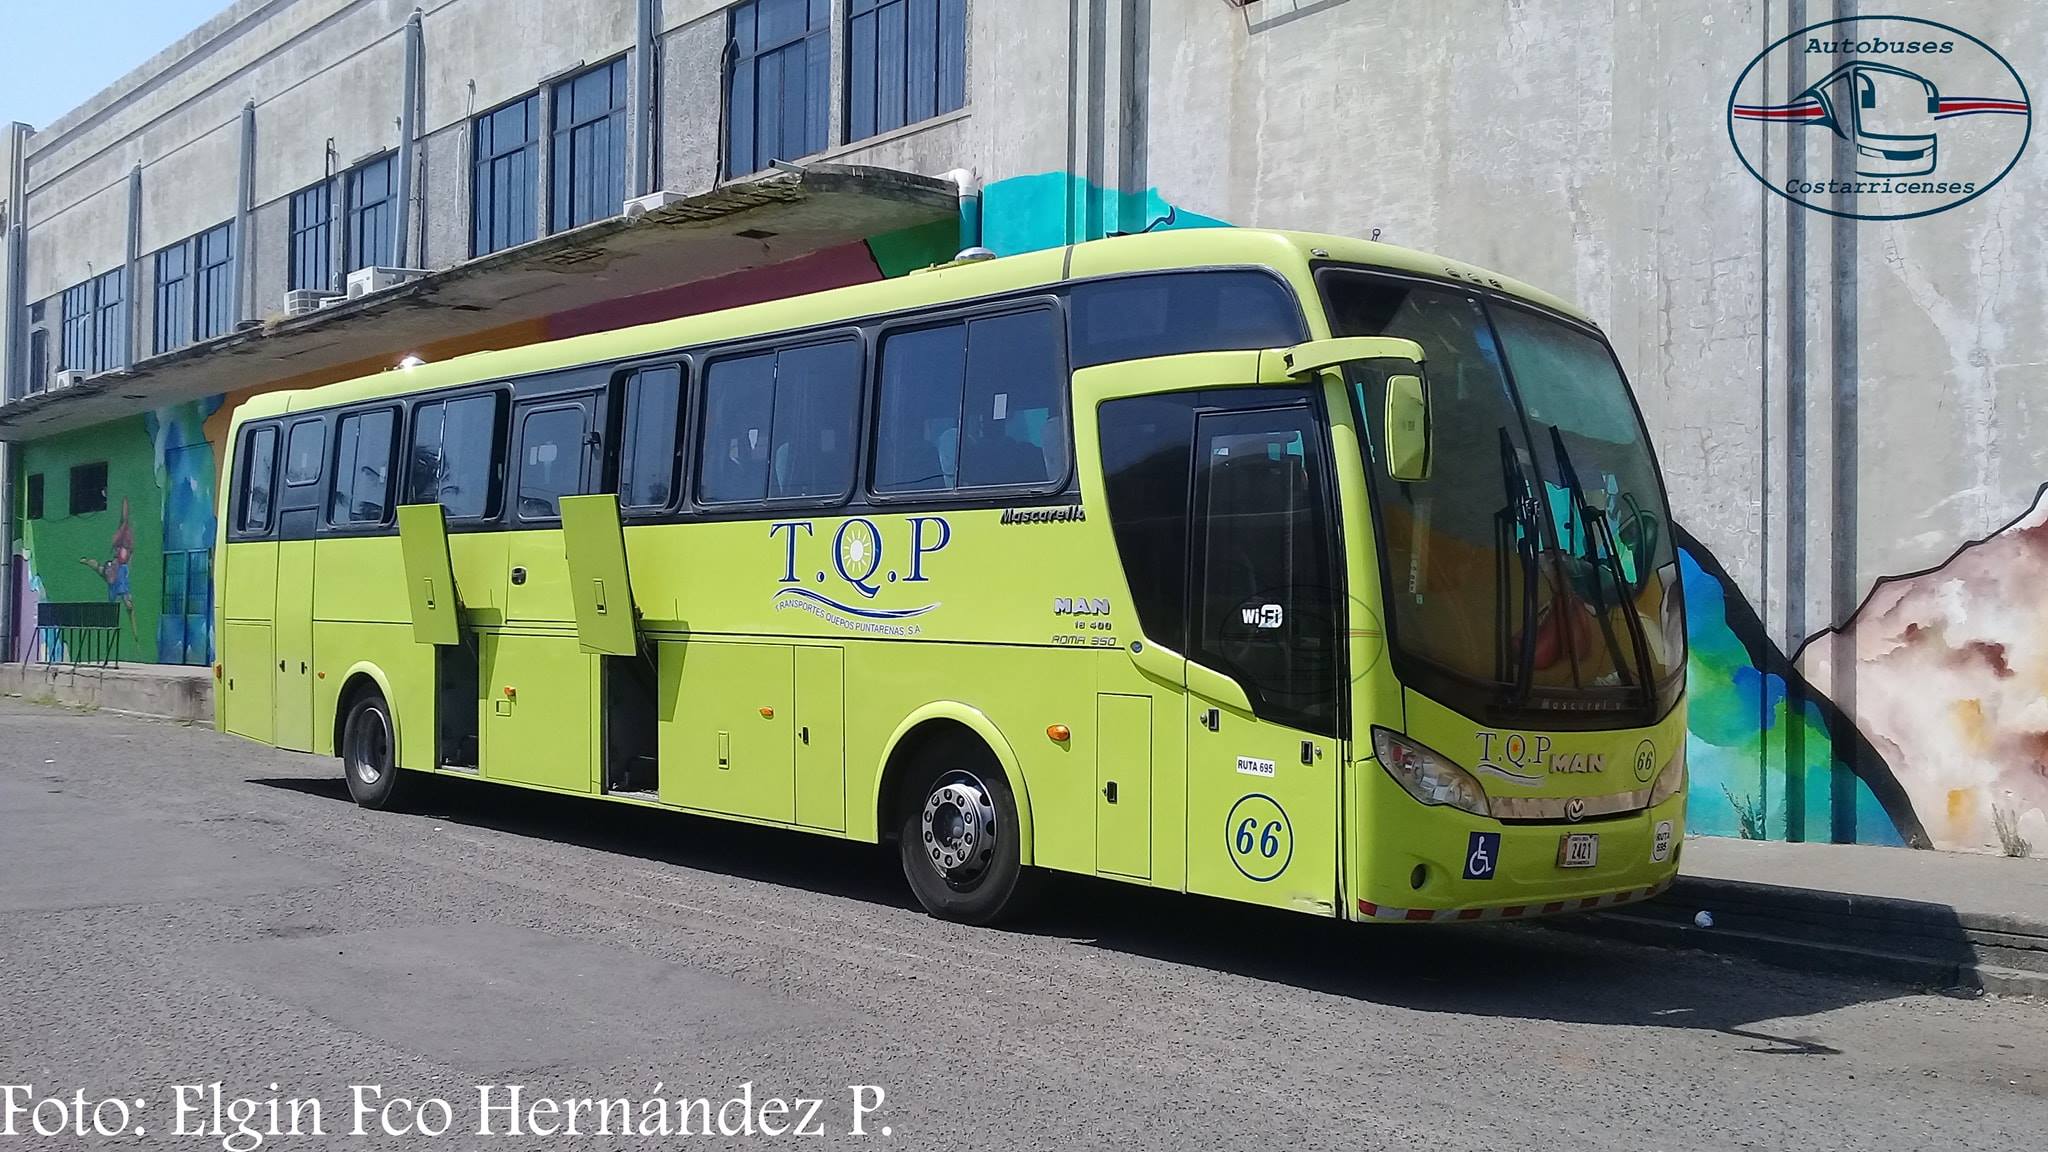 How To Get From Manuel Antonio to Jaco - All Possible Ways, cheapest way from Manuel Antonio to Jaco, Manuel Antonio to Jaco, Manuel Antonio costa rica to Jaco, Manuel Antonio to Jaco bus, Manuel Antonio to Jaco costa rica, Manuel Antonio to Quepos, Quepos to Jaco,